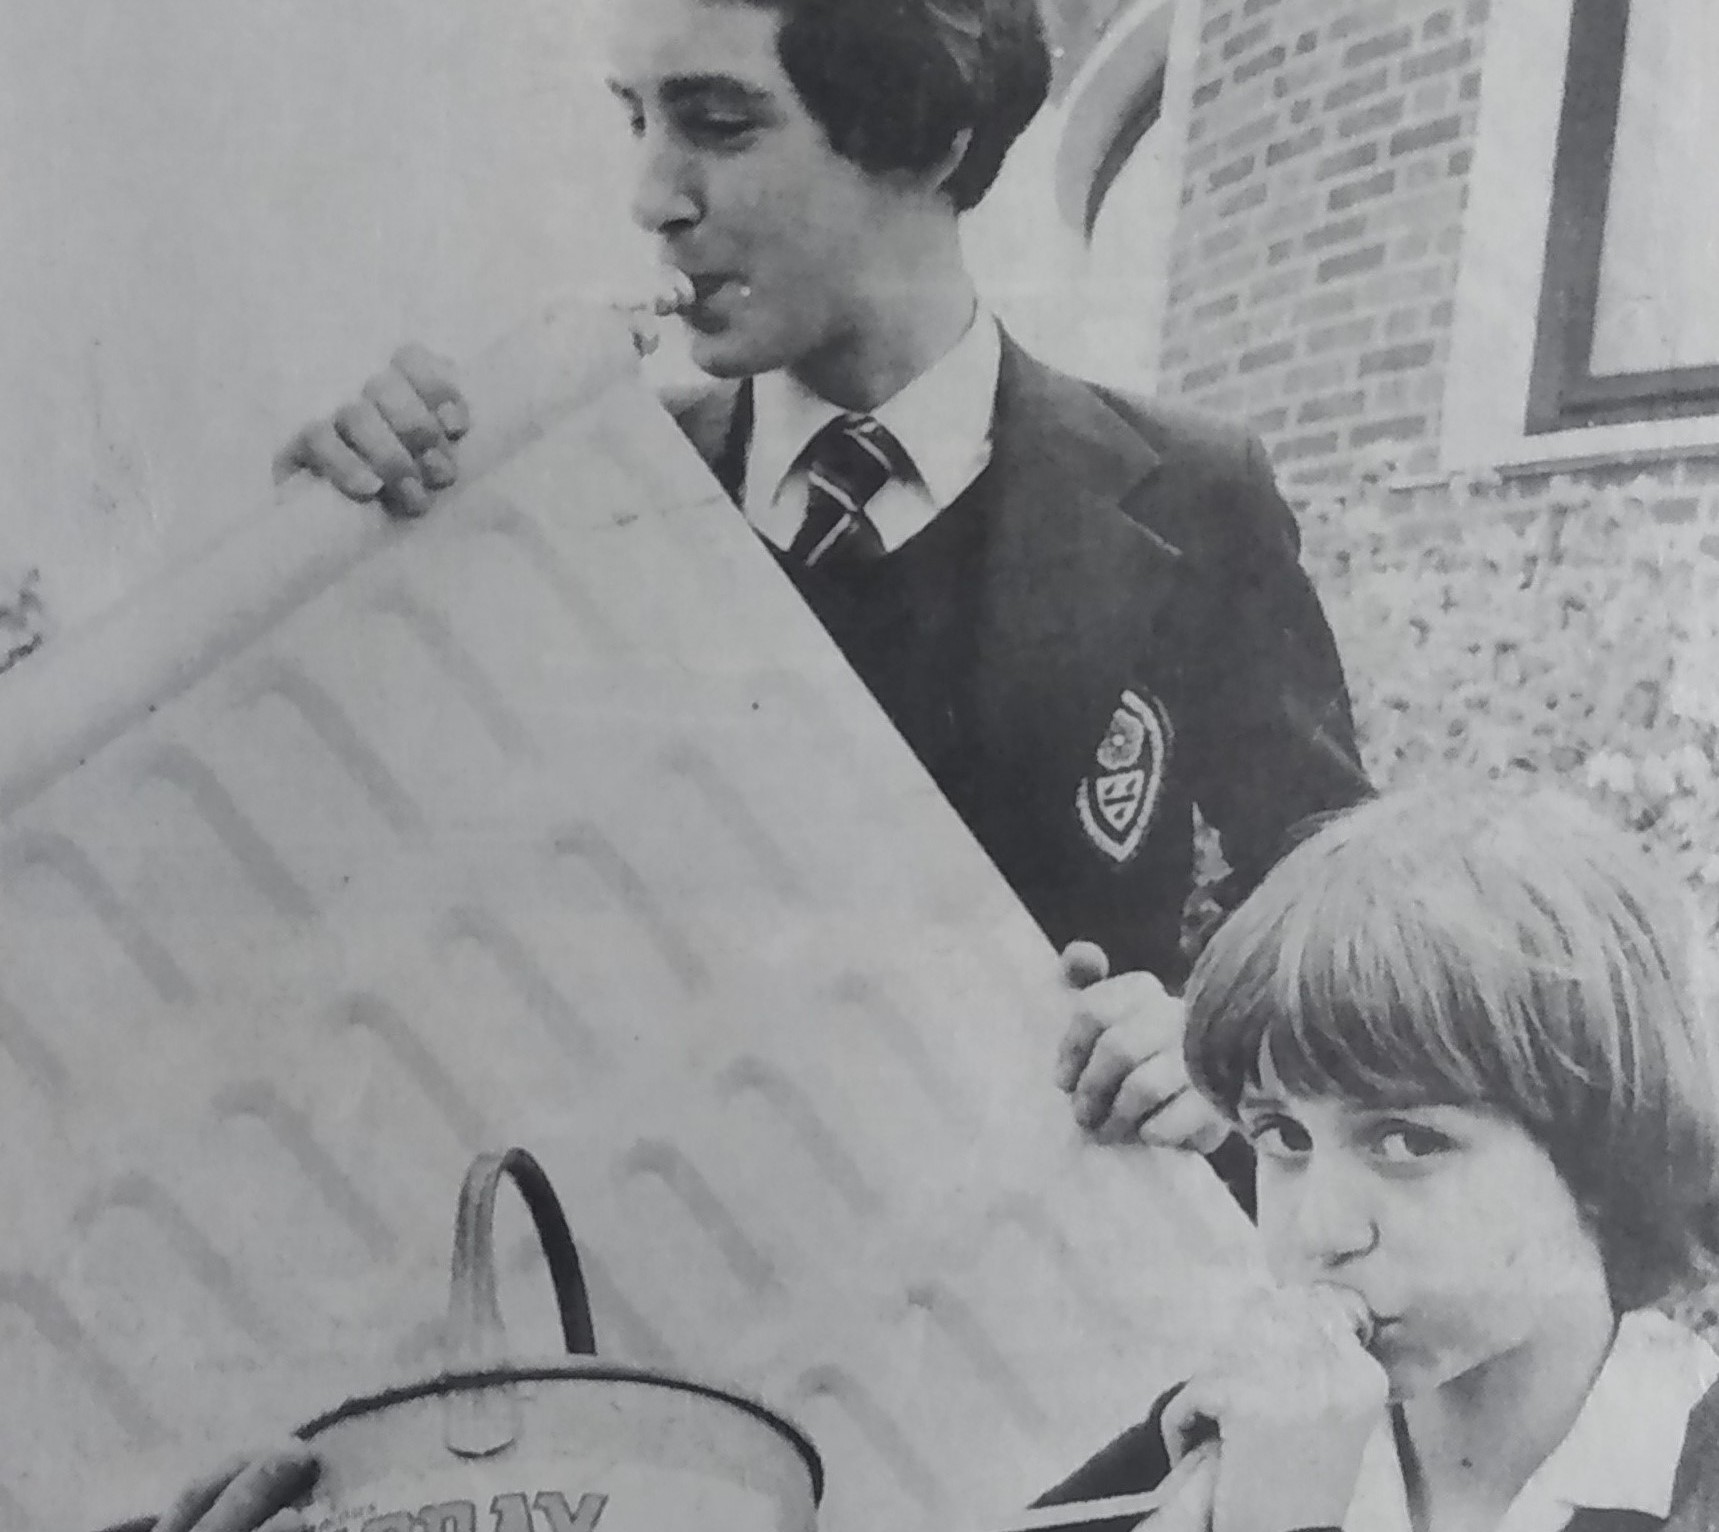 Heavy metal music makers Paul Cerri and Jane Kenny-Smith sorting out items for the school bazaar in July 1981